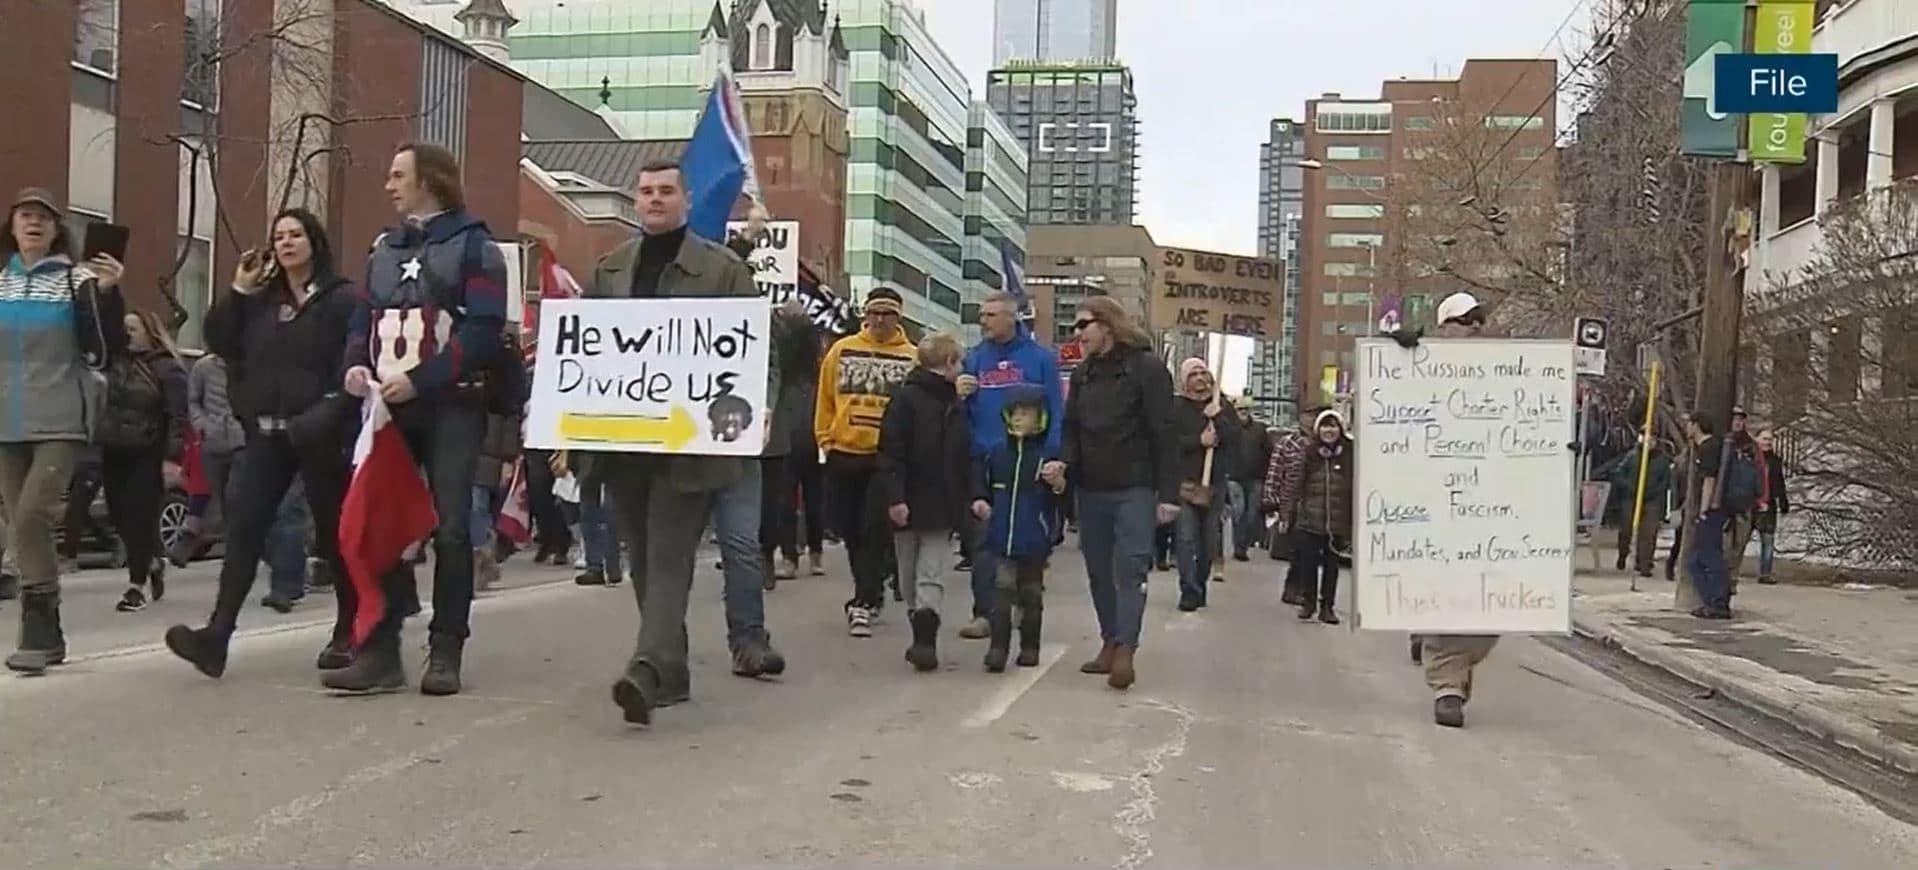 Calgary freedom protests dwindle this weekend as demonstrators comply with injunction